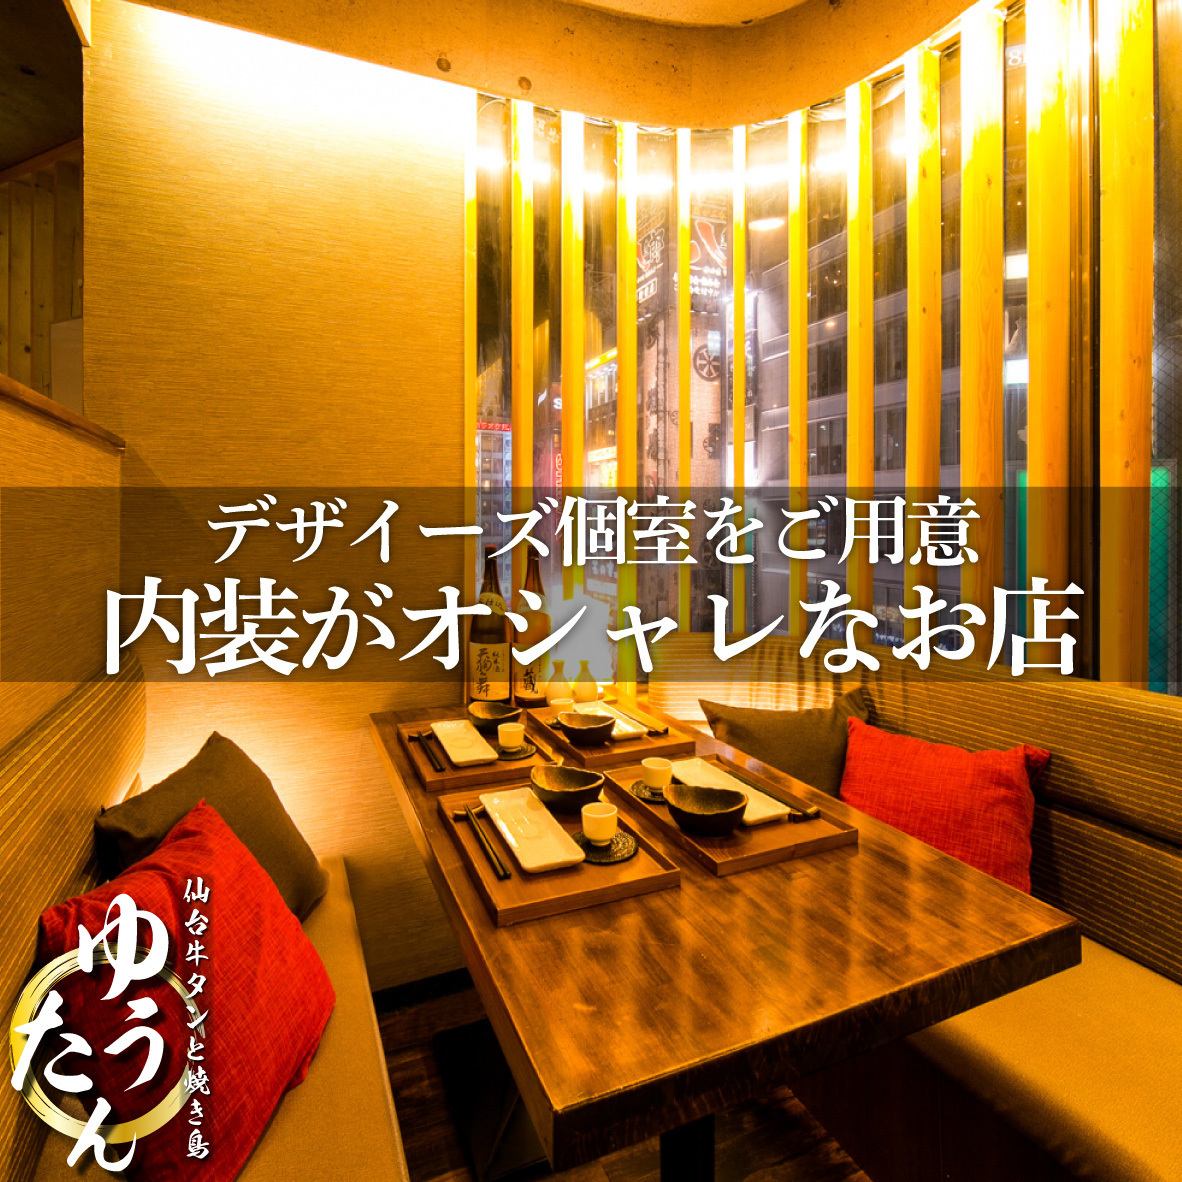 Right next to Shinjuku Station! We offer private rooms with a relaxing atmosphere.